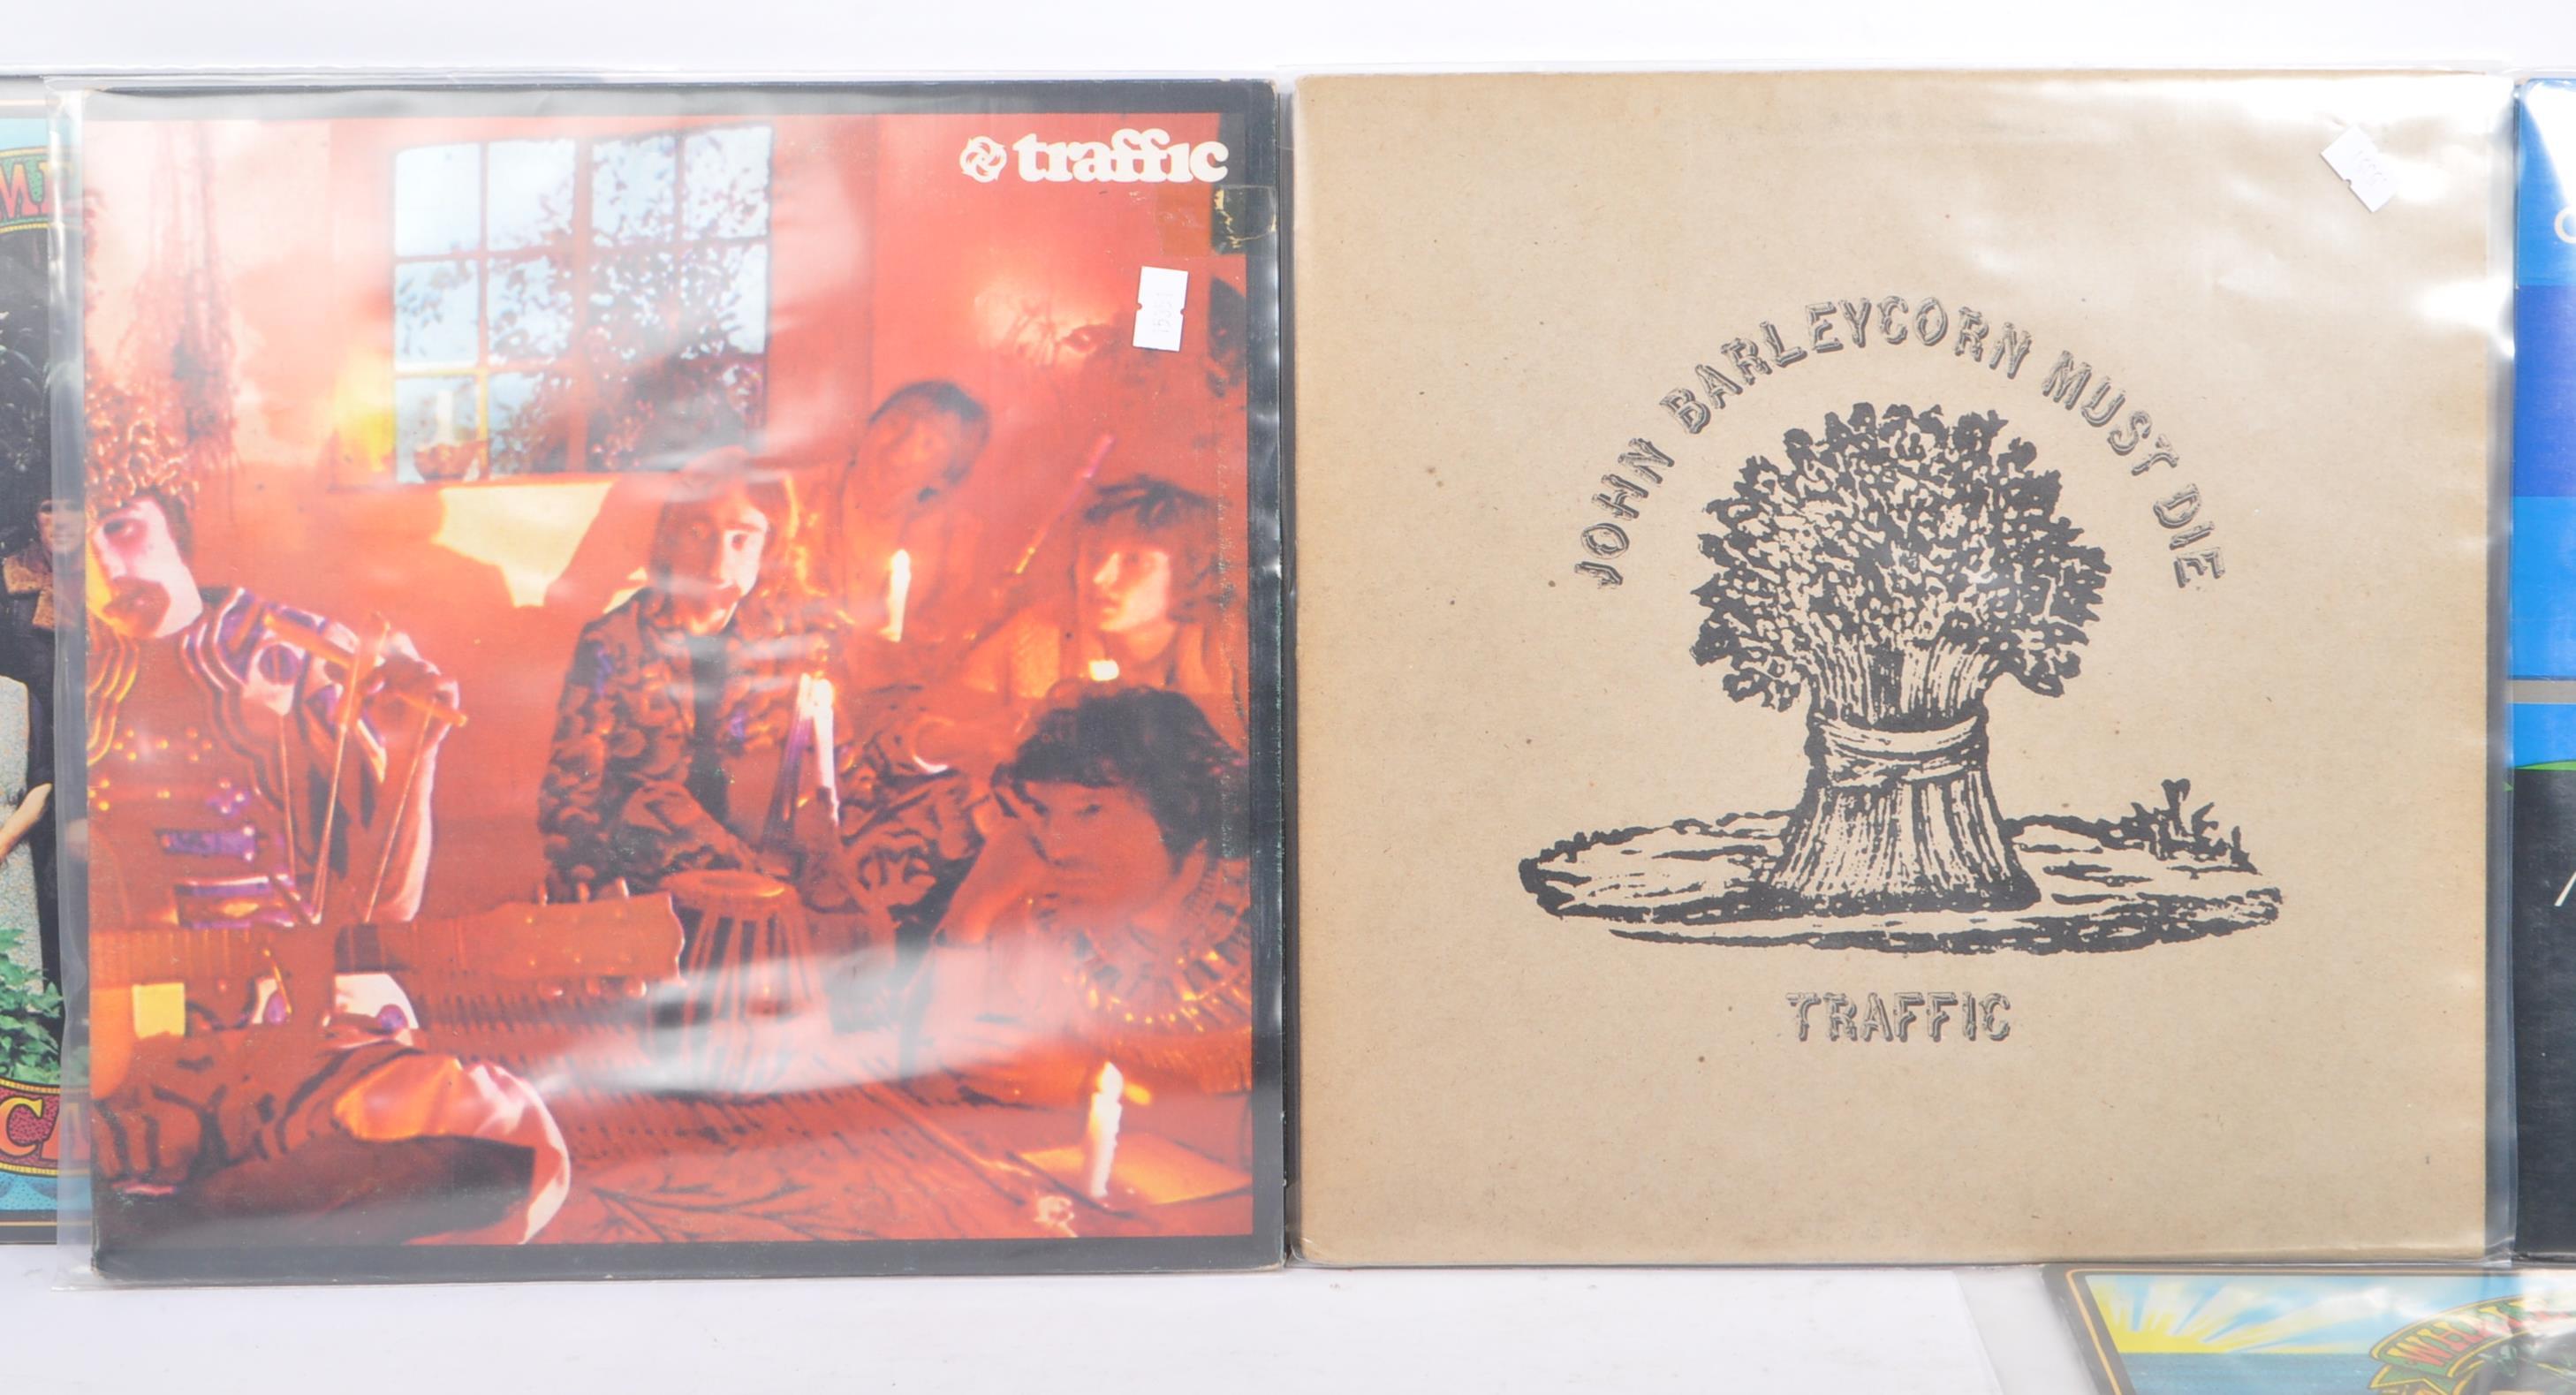 TRAFFIC / JIM CAPALDI - COLLECTION OF VINYL LP RECORD ALBUMS - Image 4 of 5